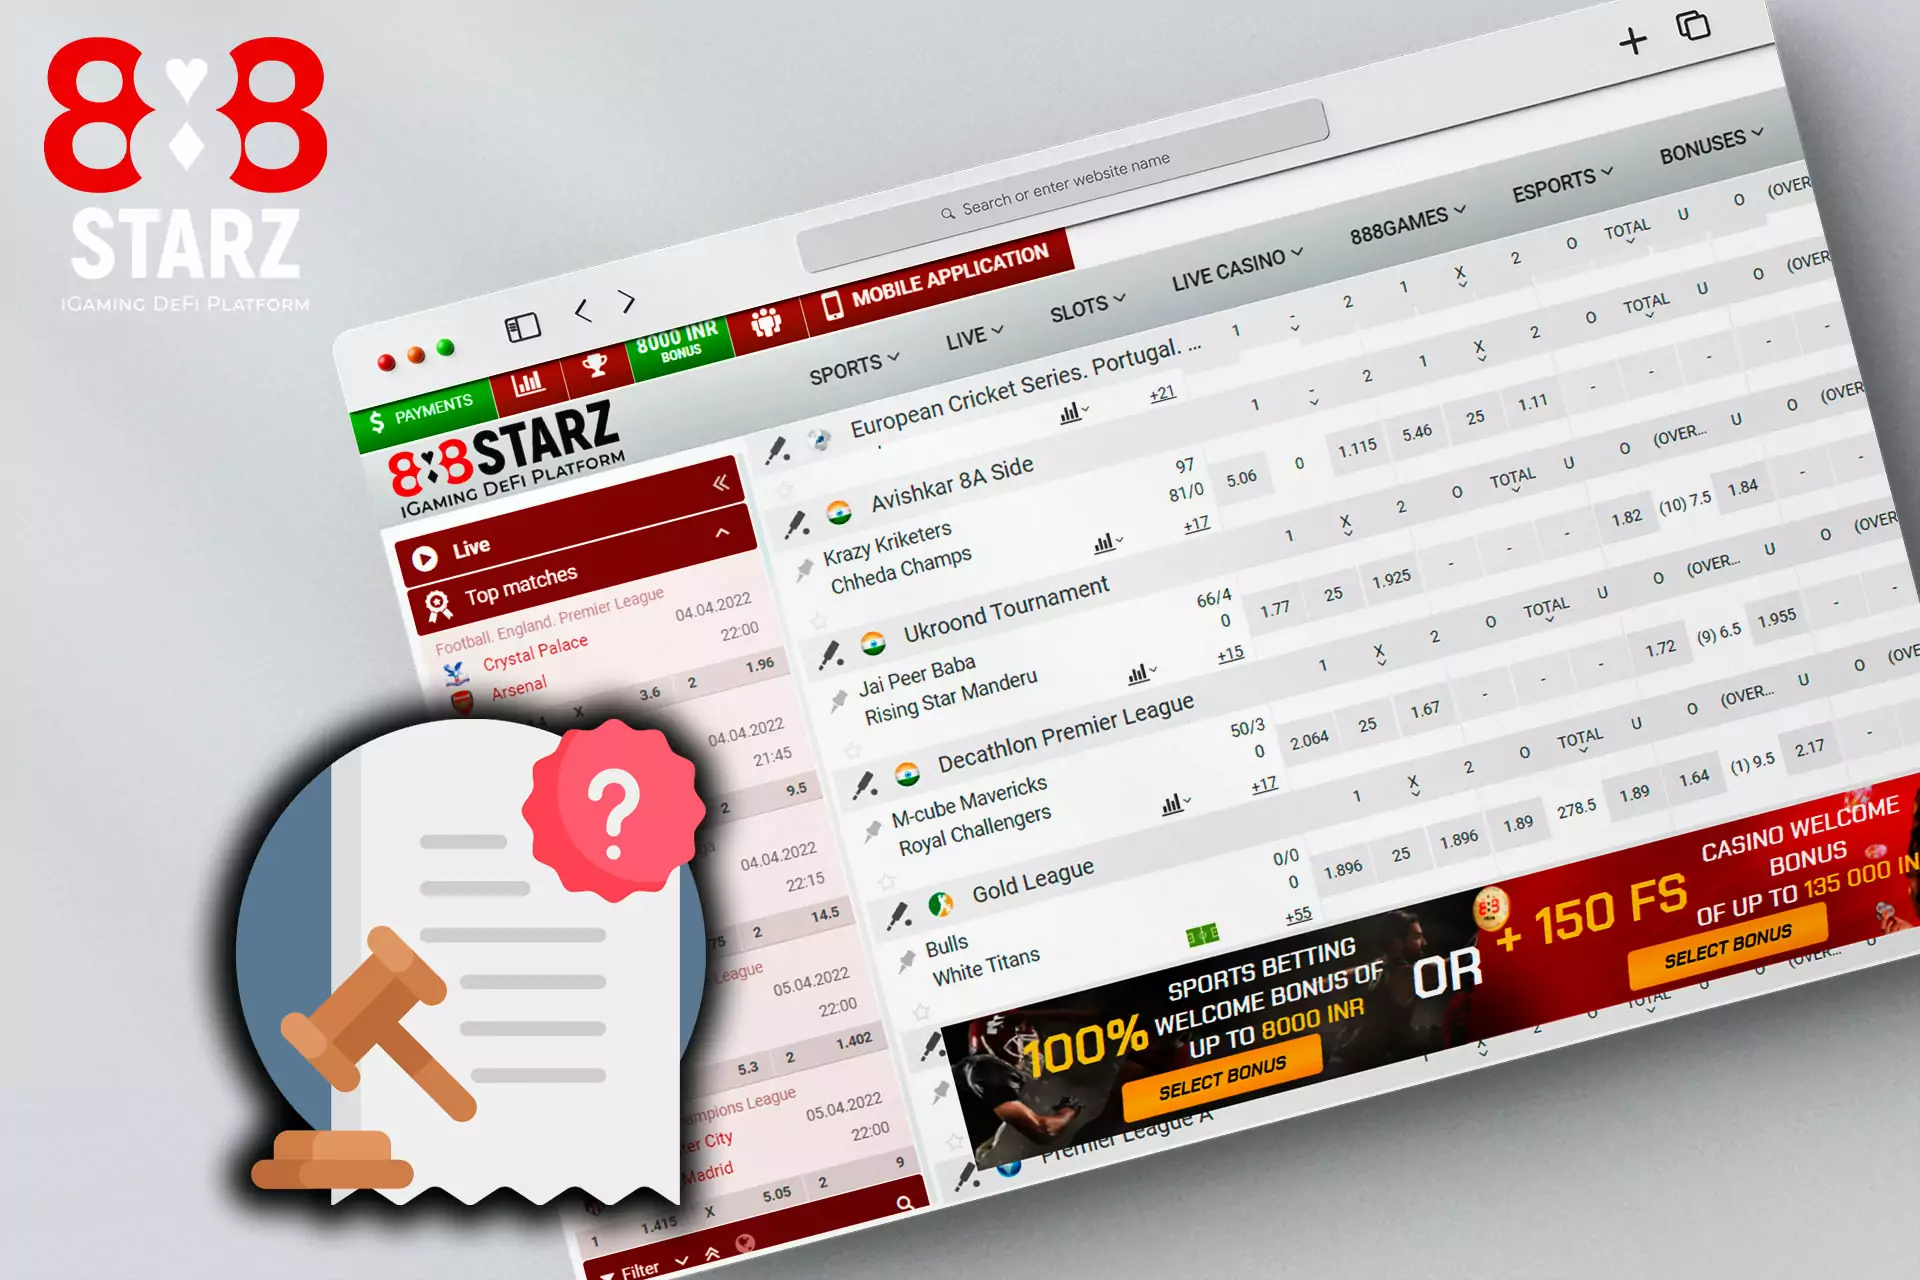 Bookmaker 888starz is completely legal in India.